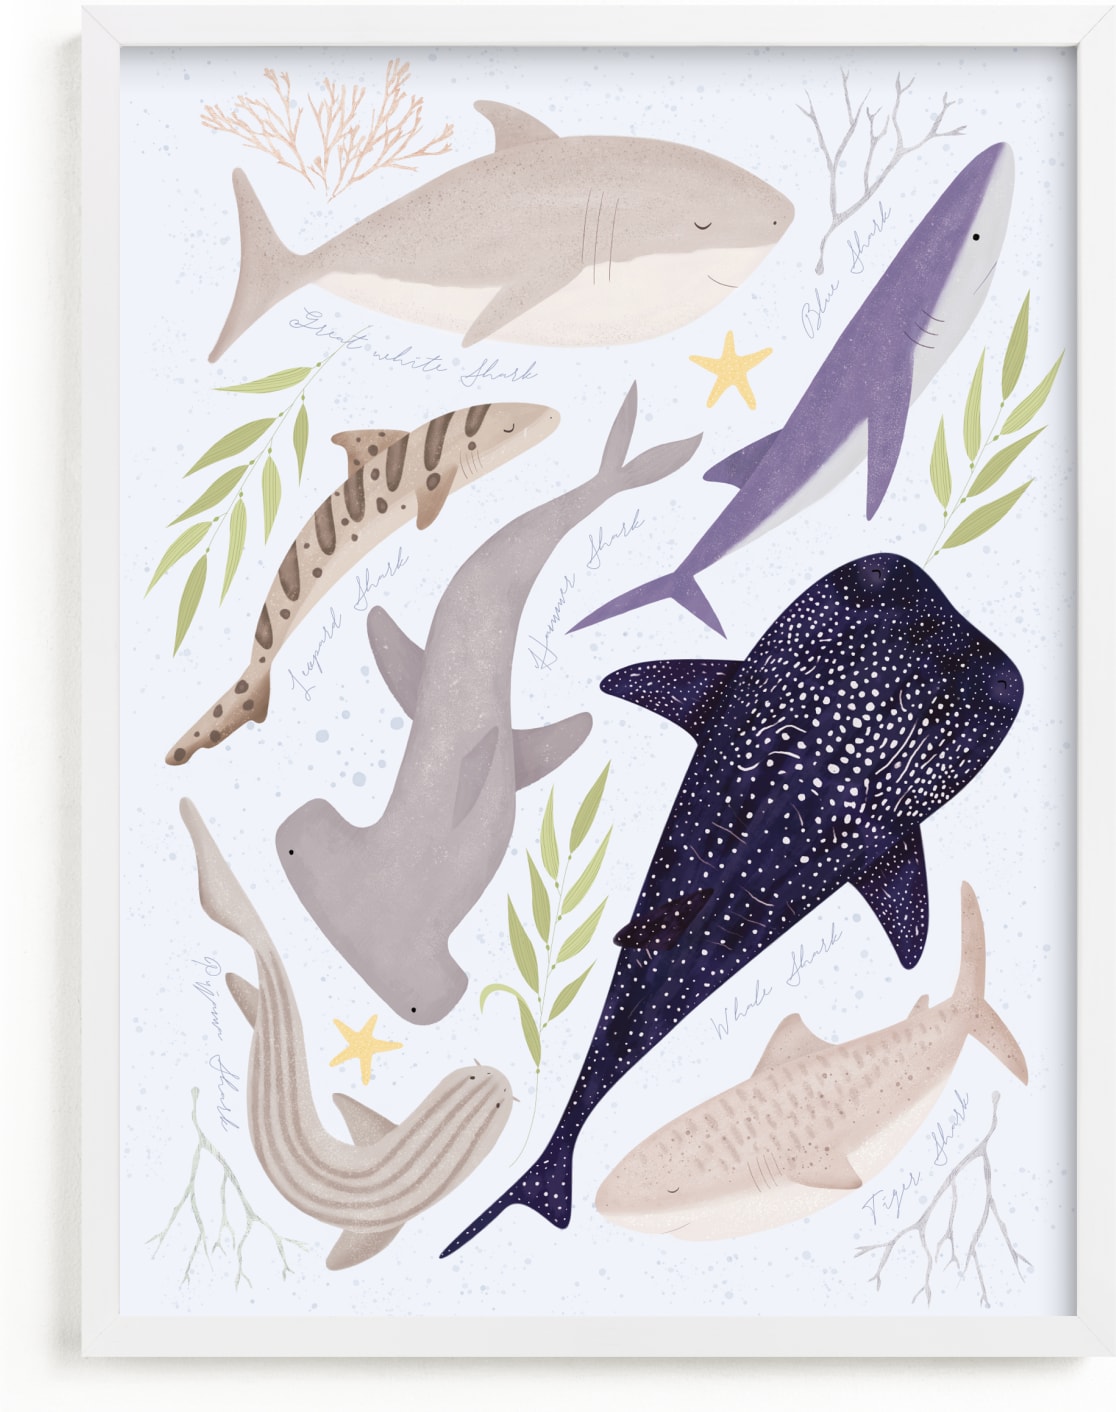 This is a blue art by Sabrin Deirani called Marvelous sharks.